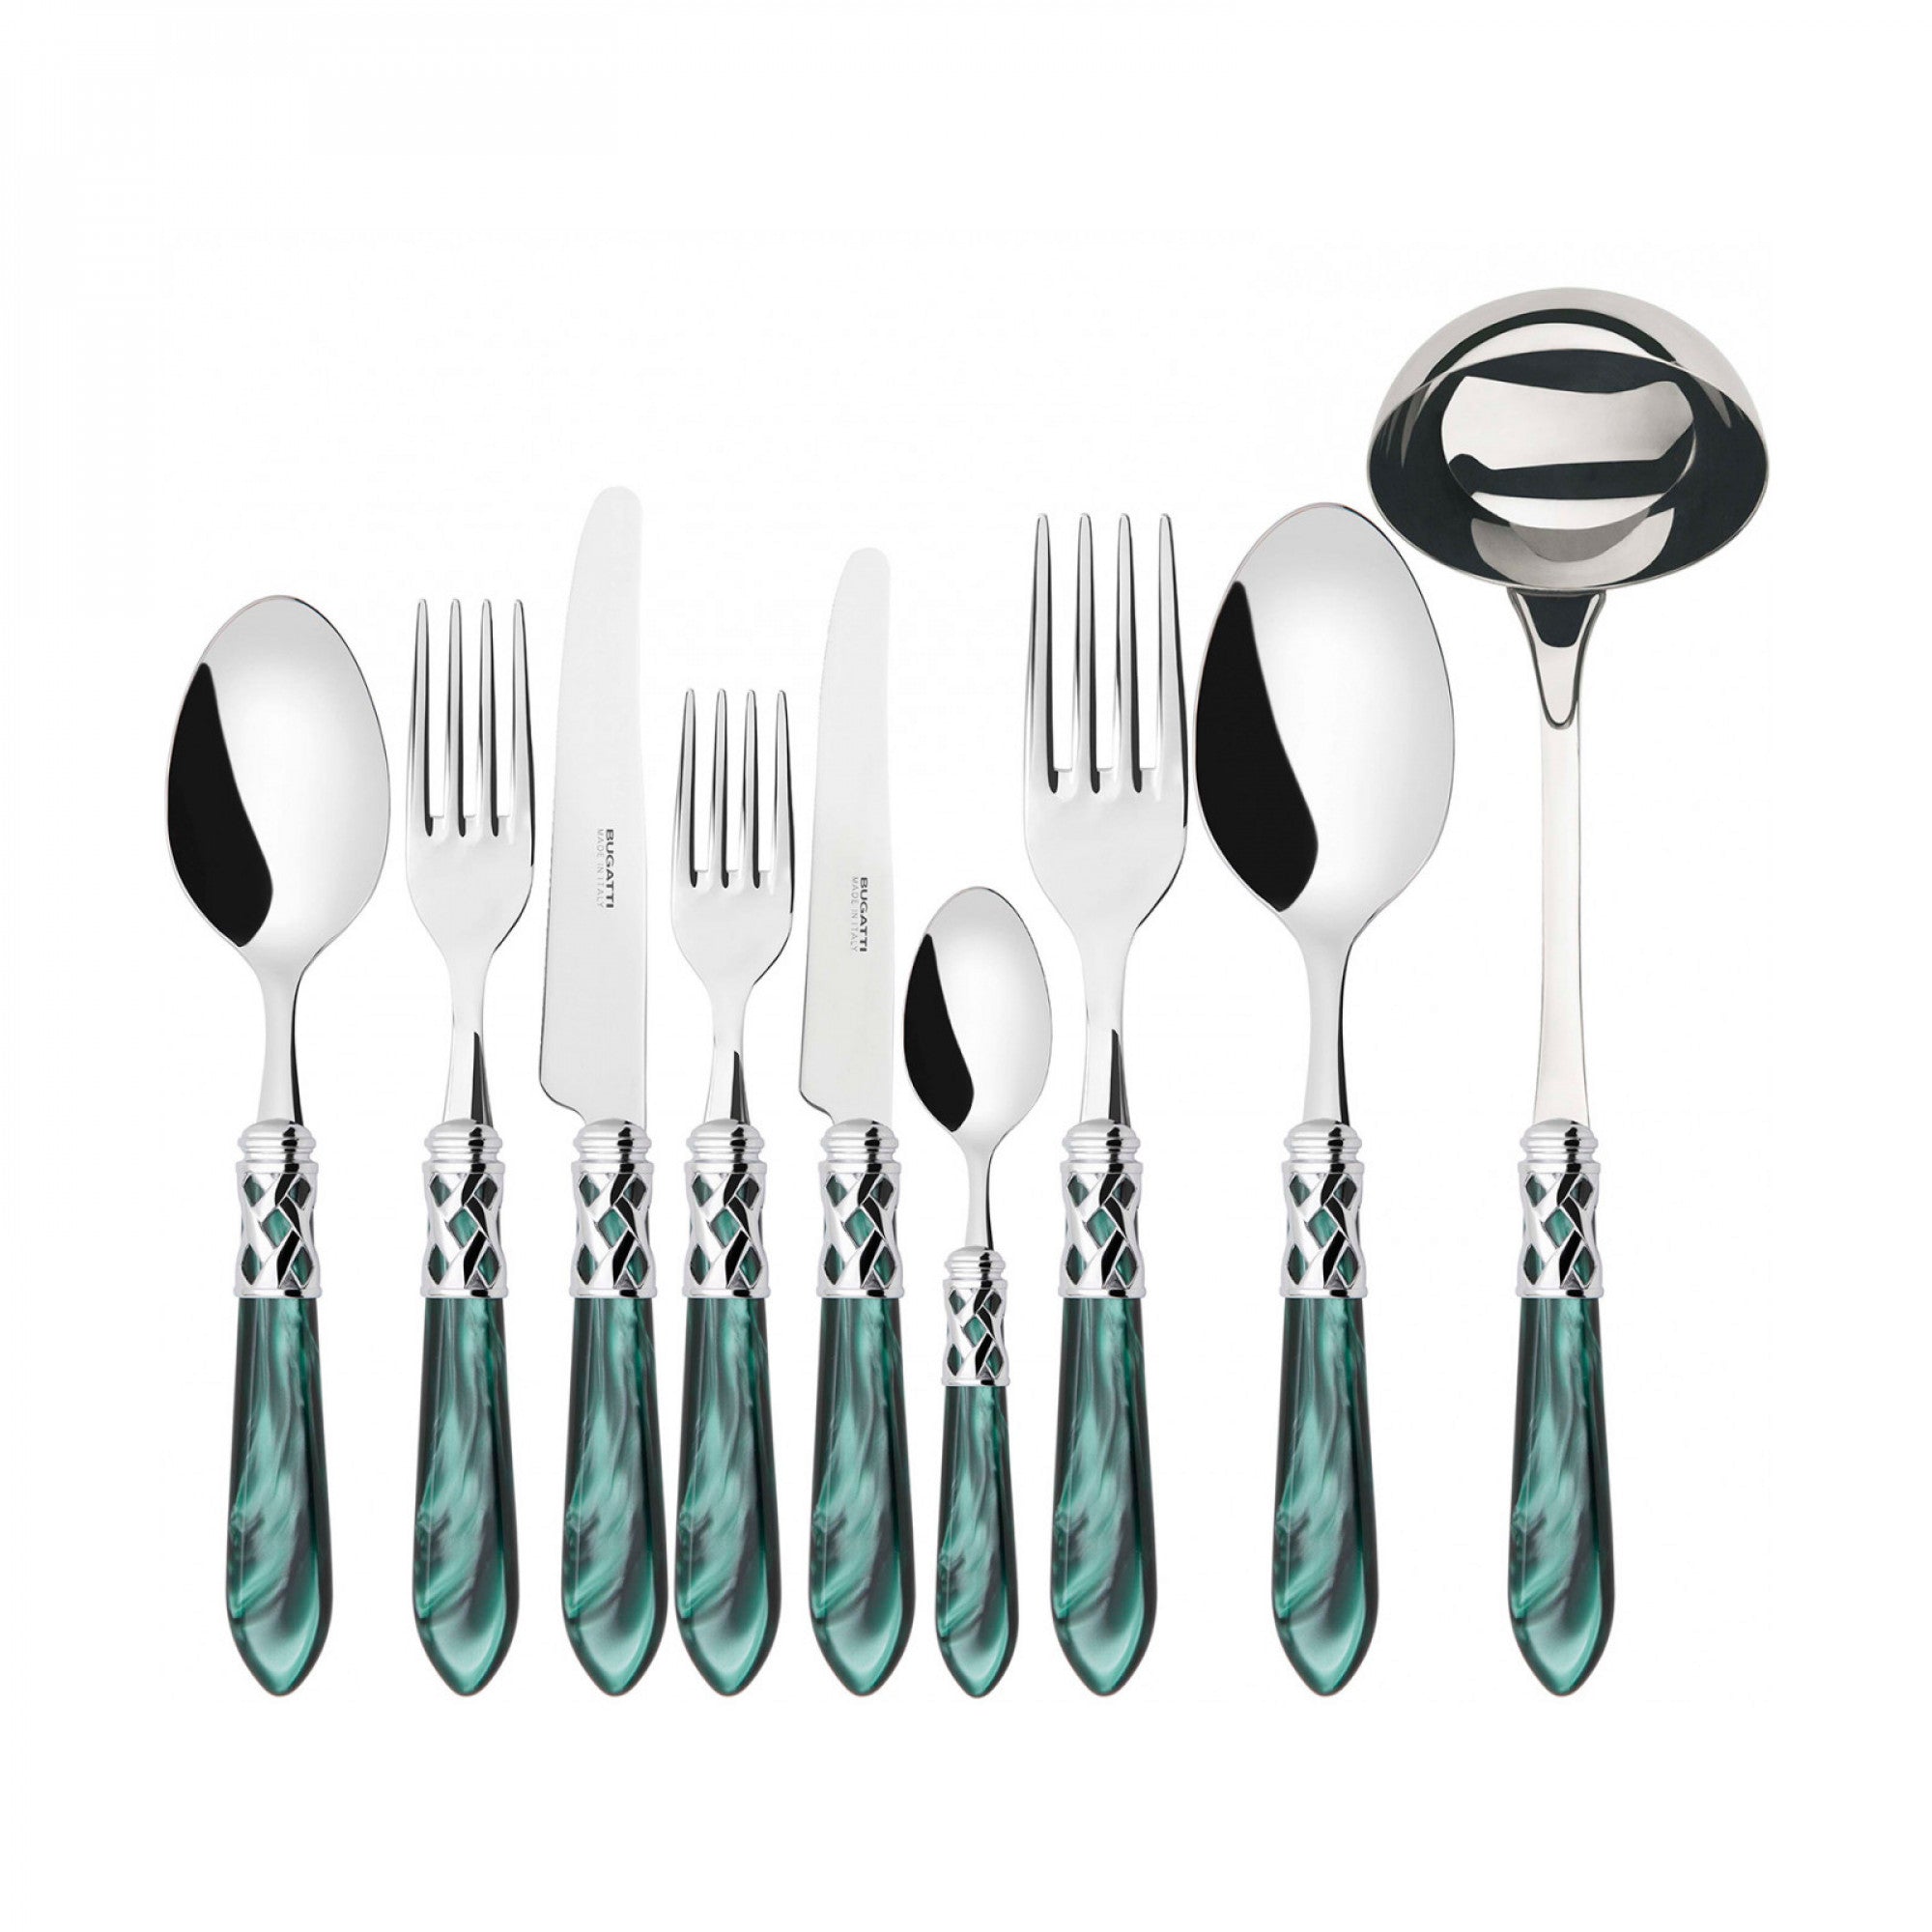 BUGATTI, Aladdin, 75-piece cutlery set in 18/10 stainless steel chromed ring mother-of-pearl effect handle, packed in gallery box